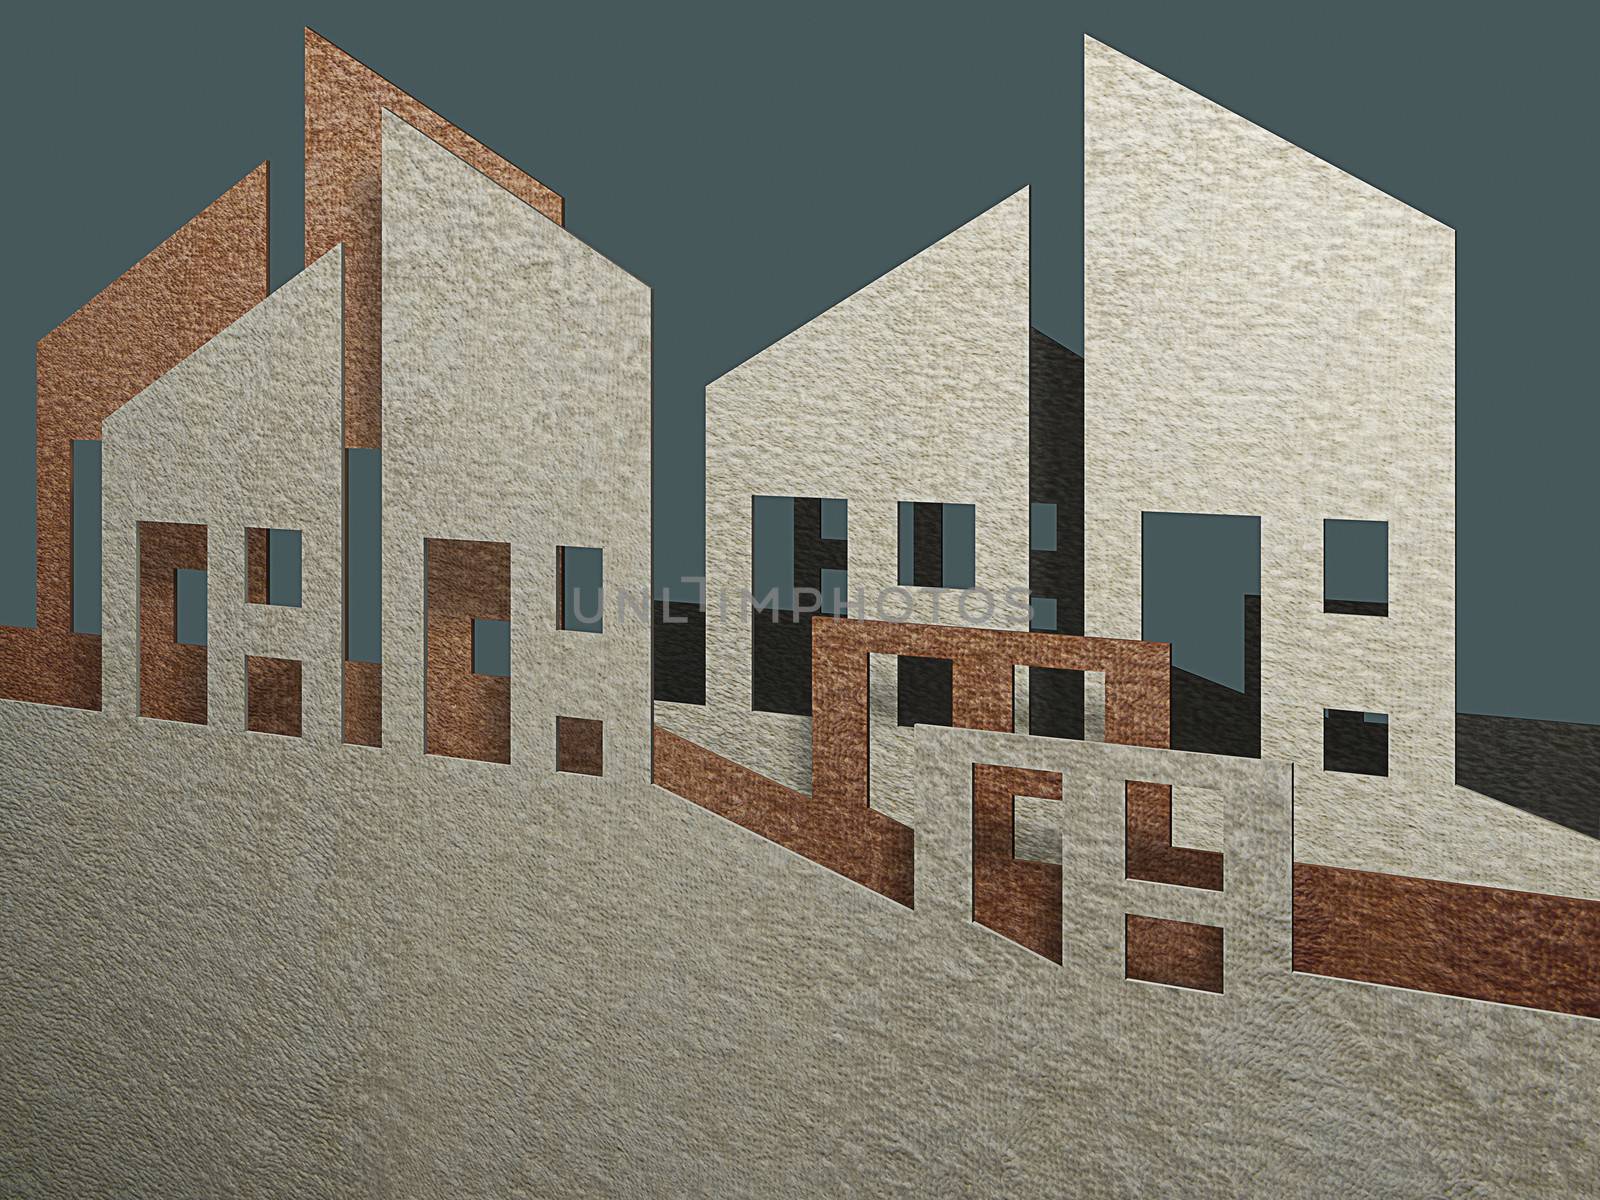 Real Estate Icons made in 3d software by vitanovski